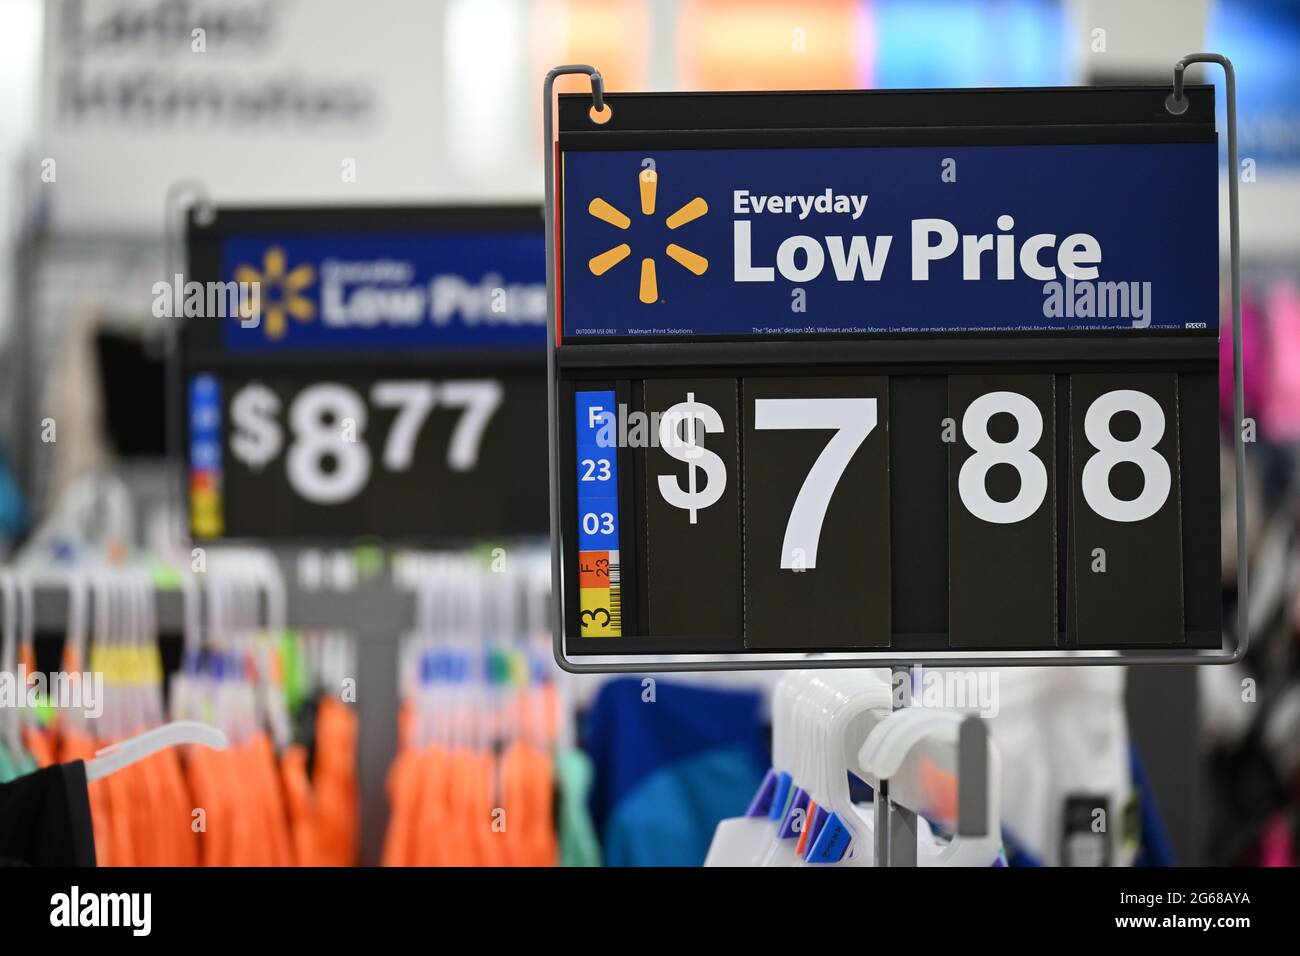 Walmart Everyday Low Price Sign on Clothing Rack, Price of '$7.88' (foreground) and '$8.77' (background), Right Side, Clothes Hangers Visible. Stock Photo